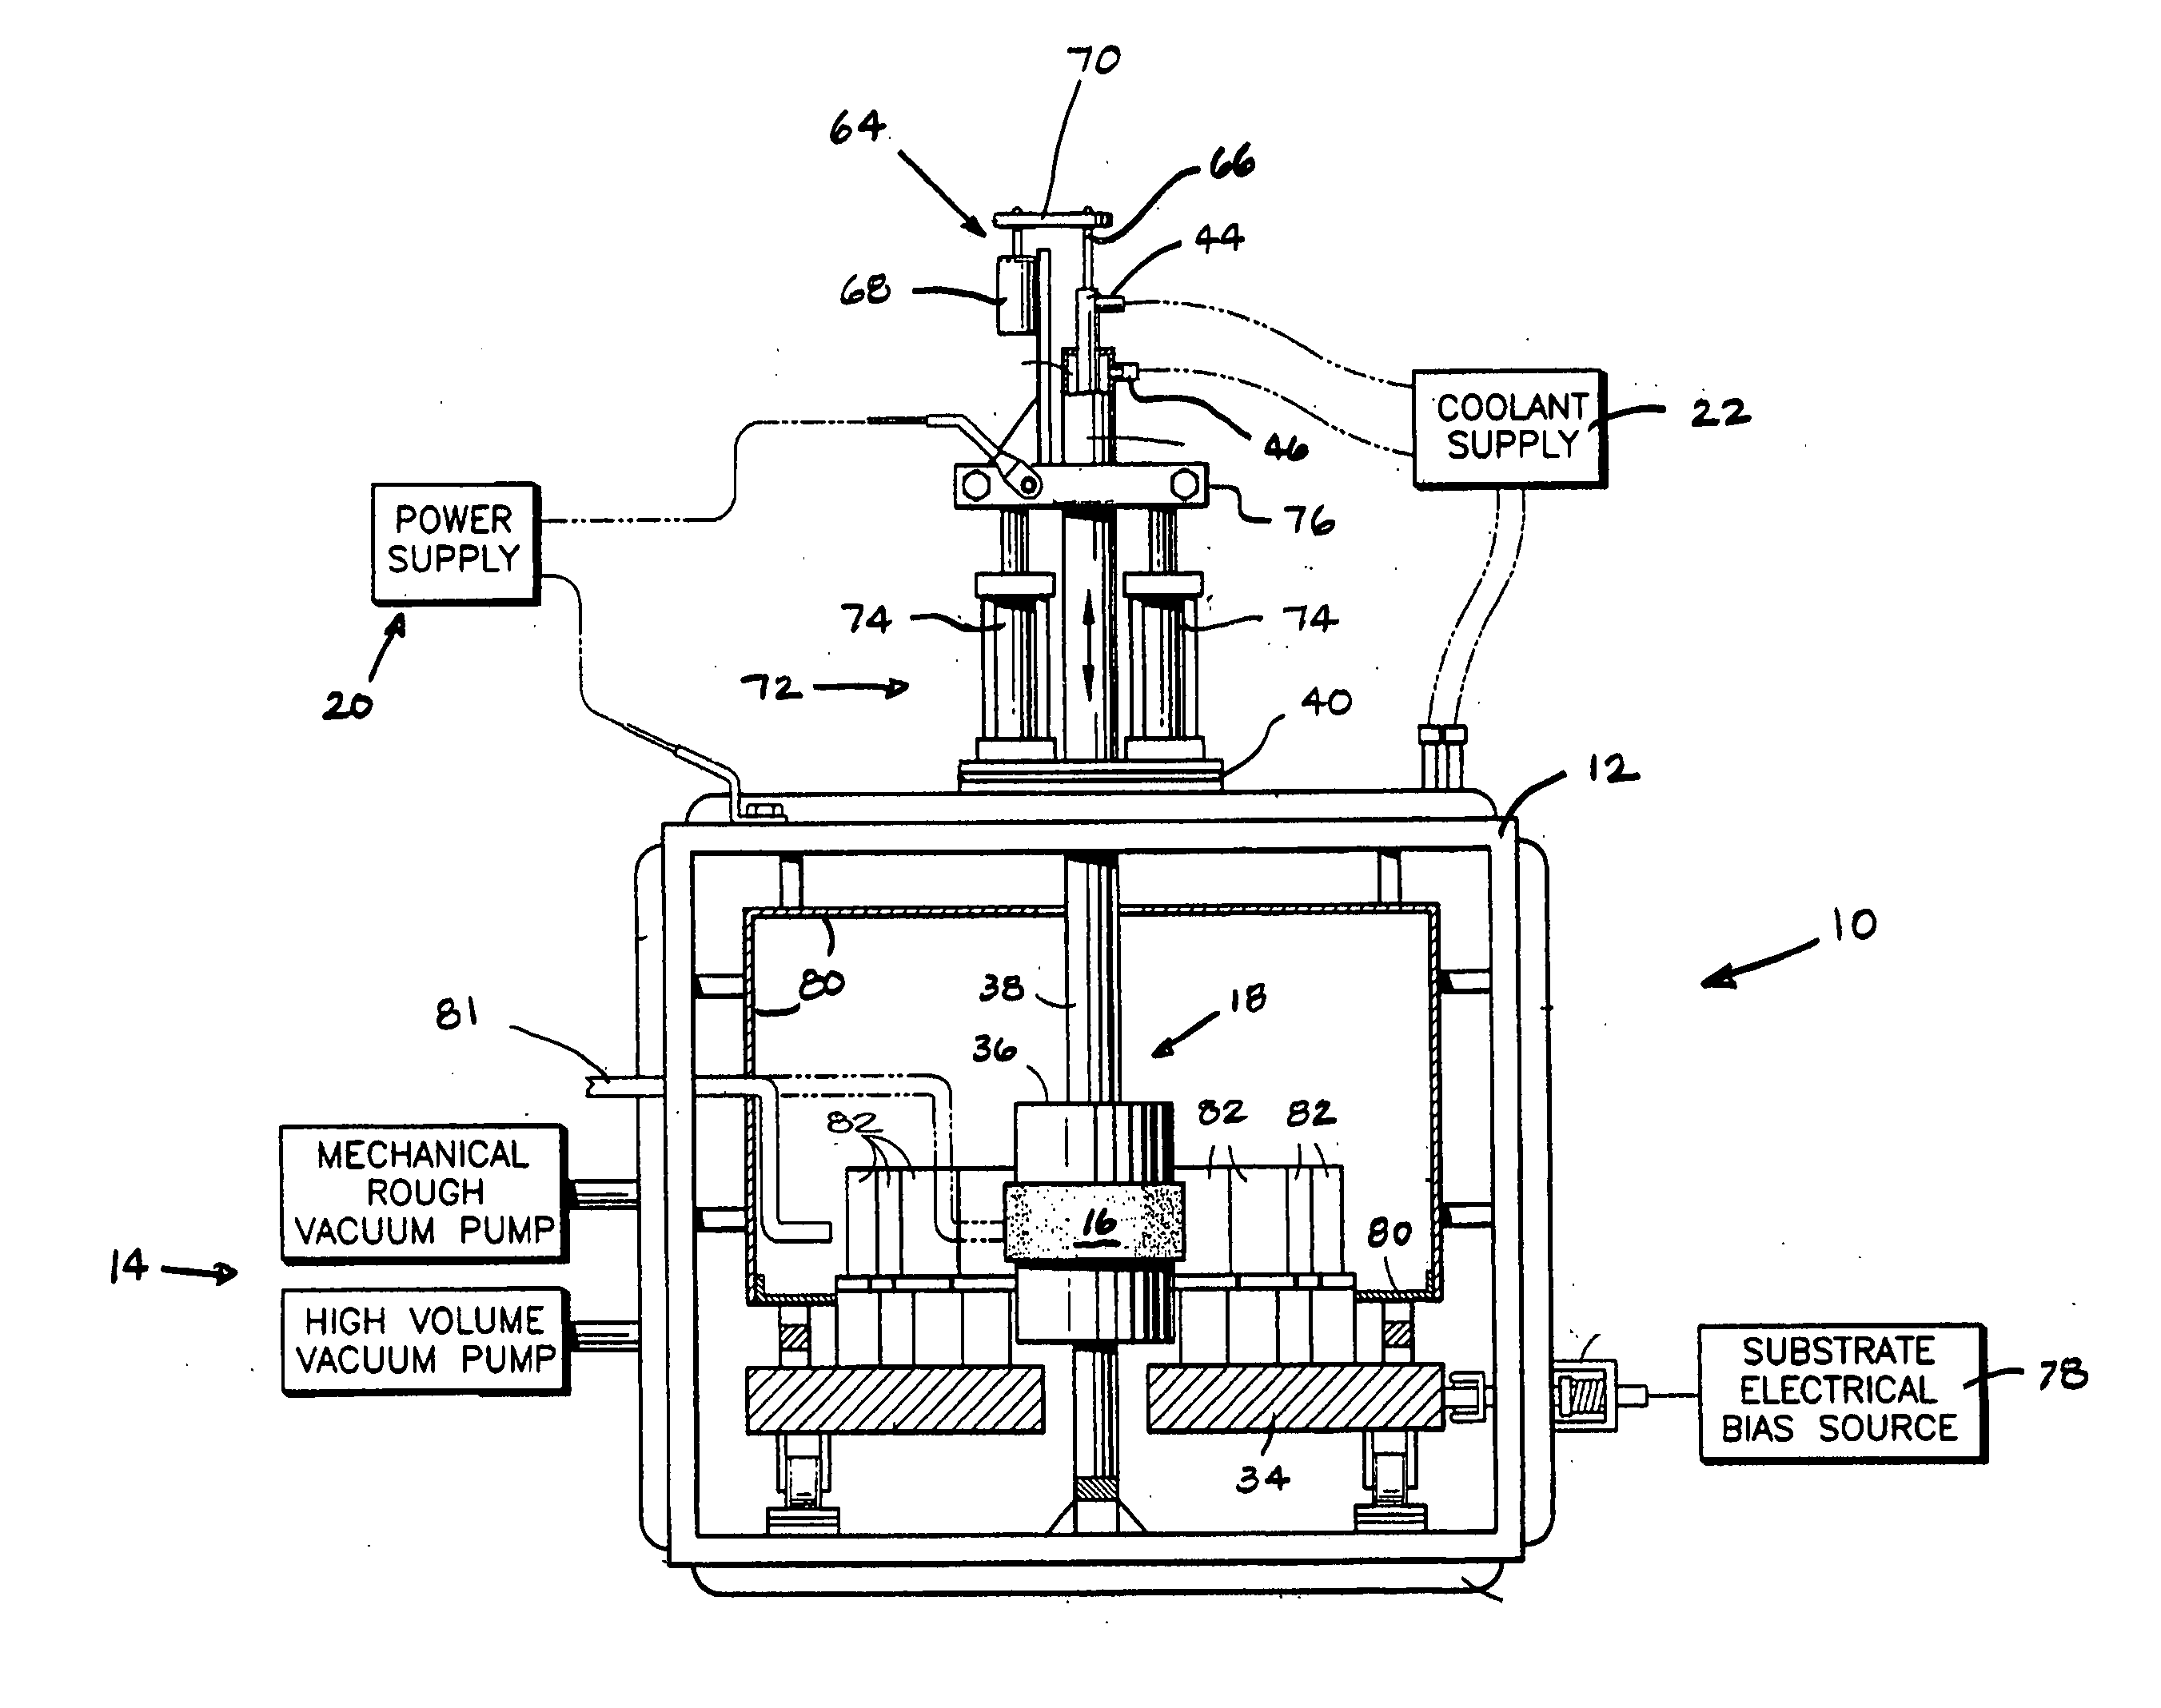 Method and apparatus for cathodic arc deposition of materials on a substrate